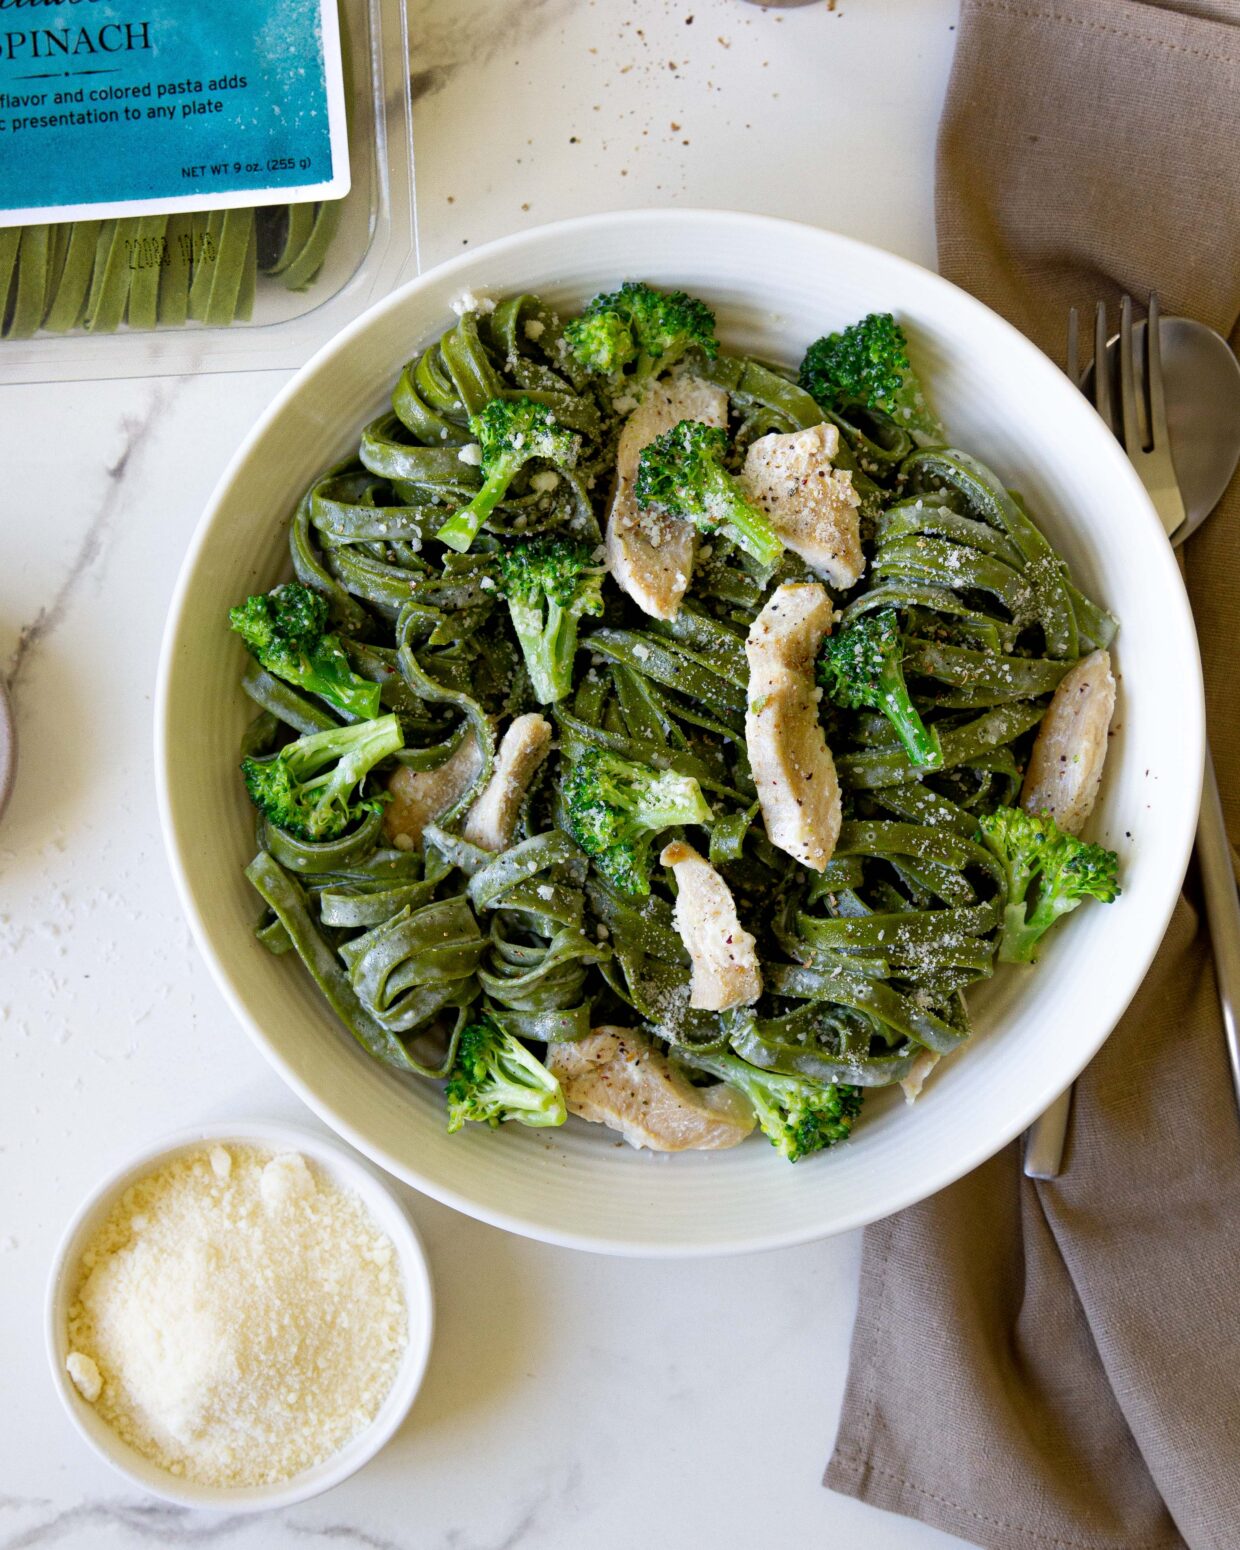 Spinach Fettuccine with Broccoli and Chicken